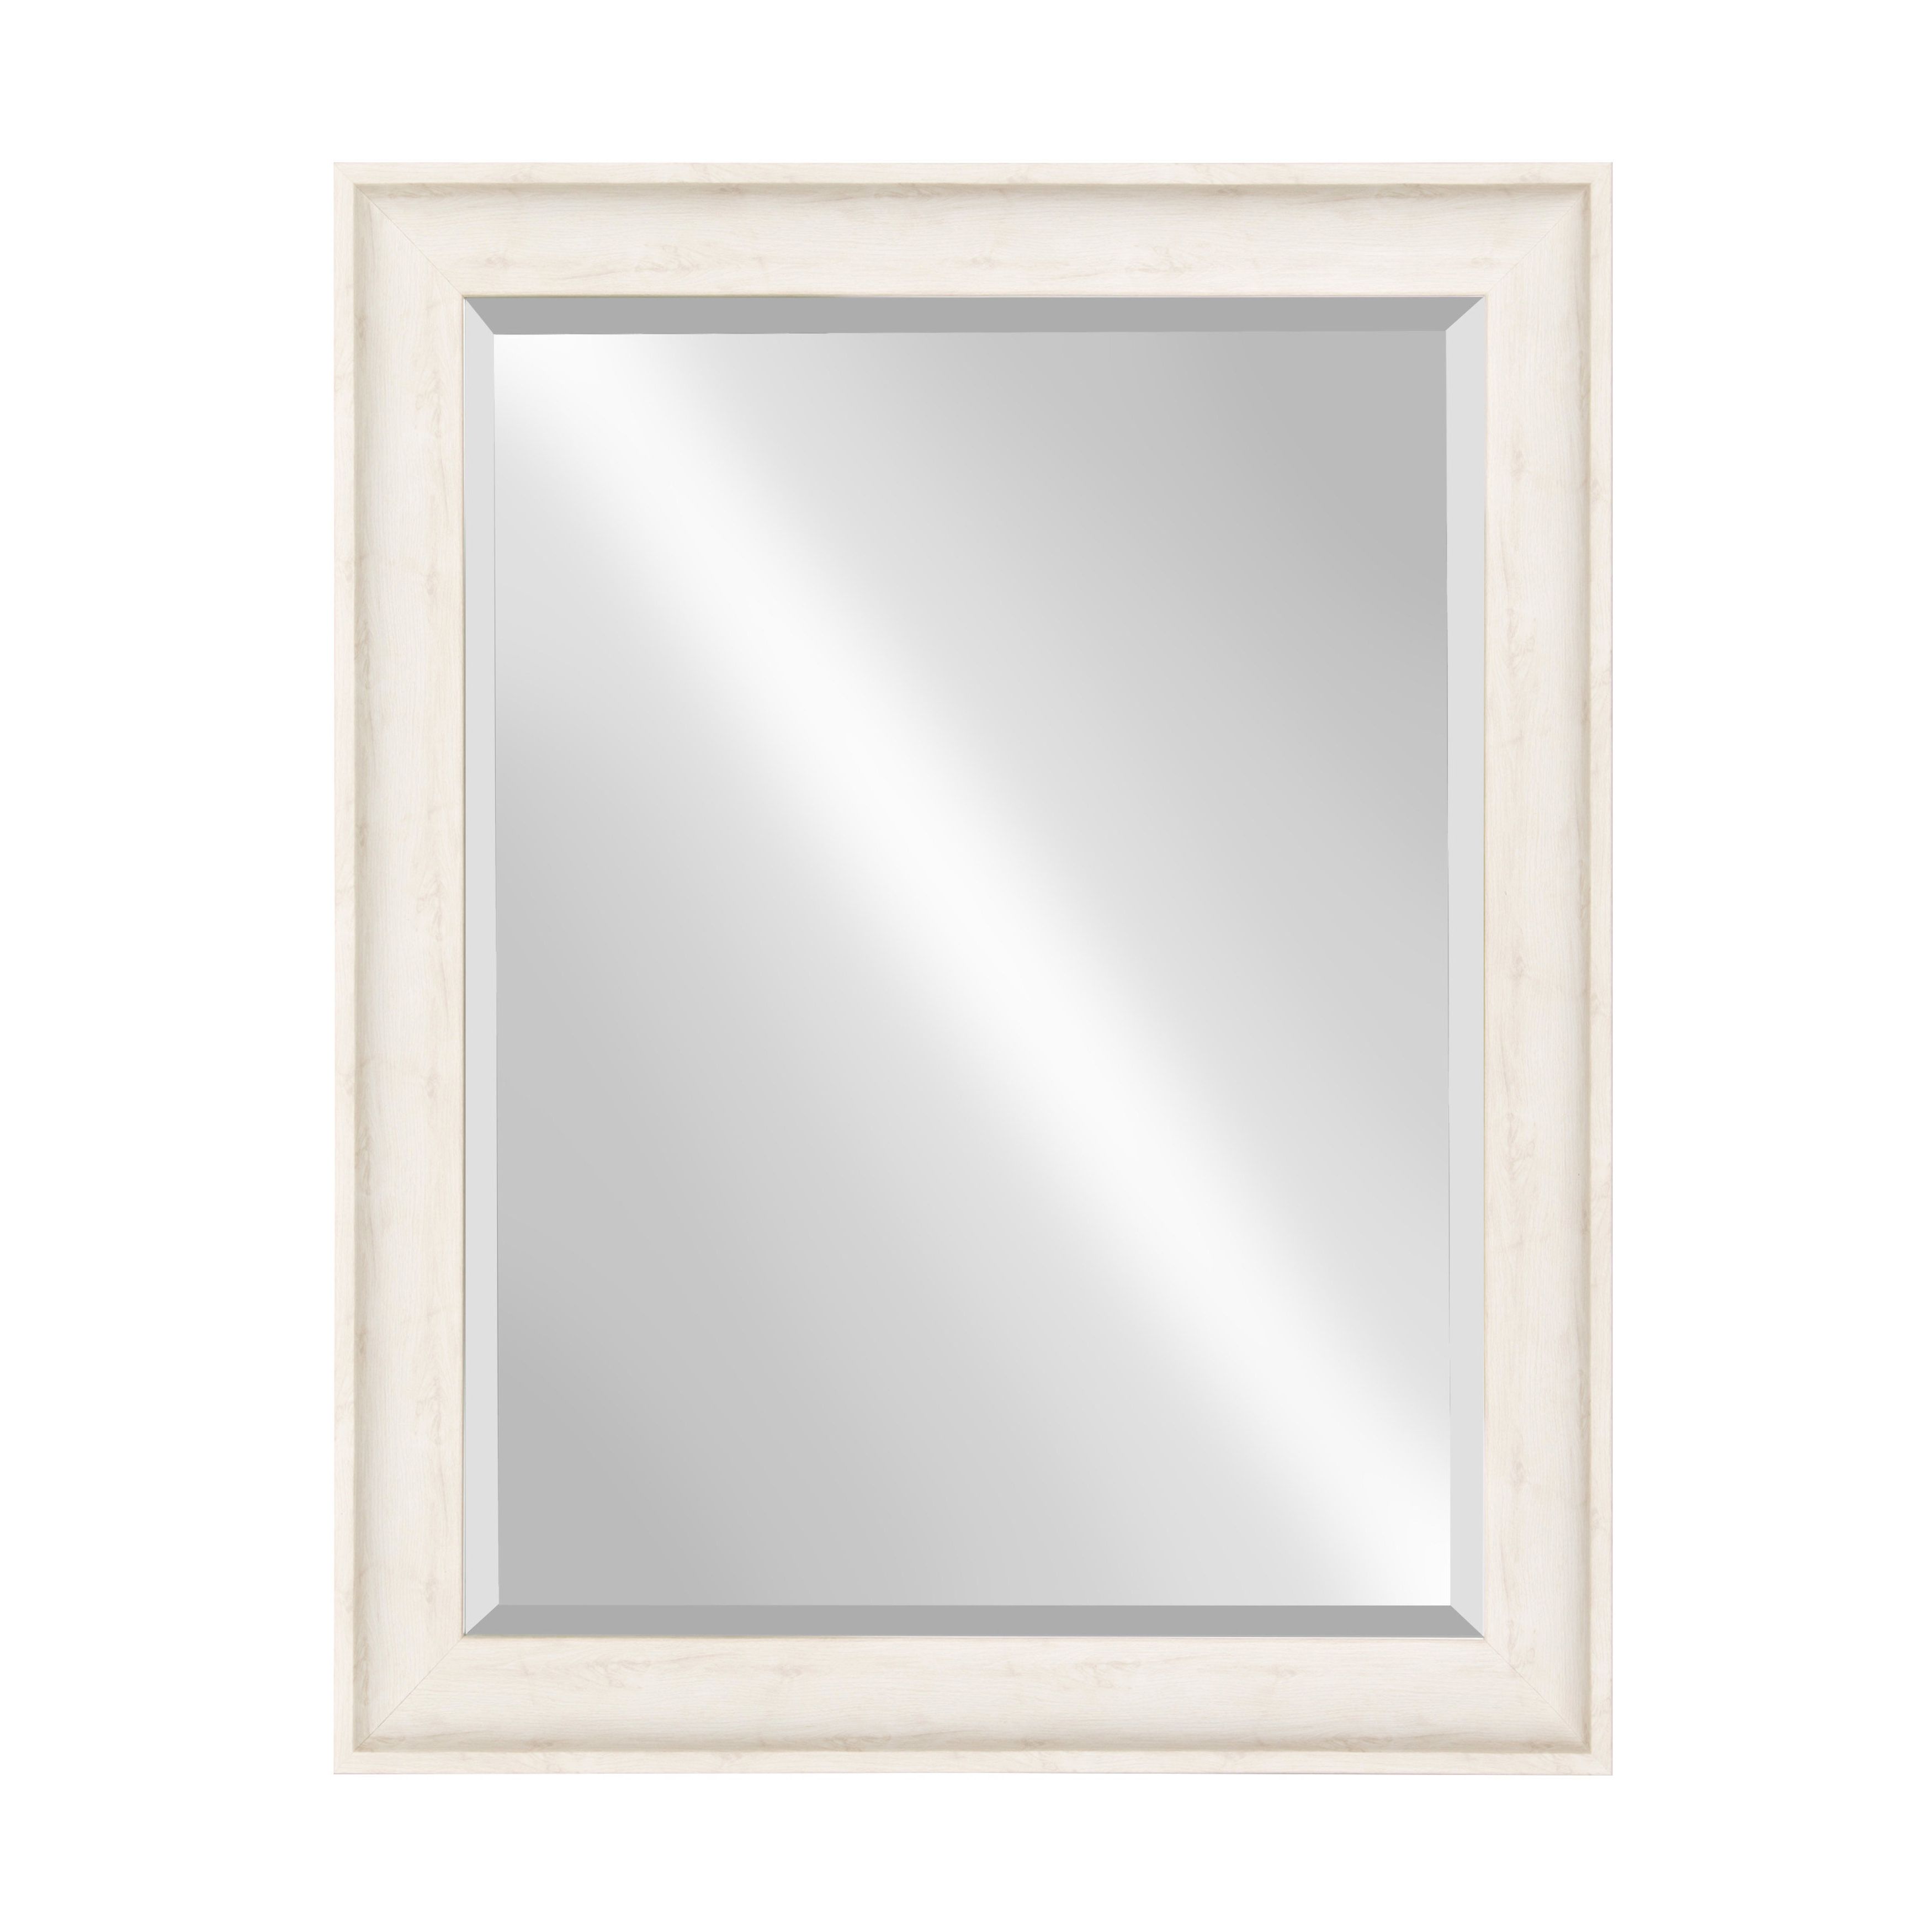 2020 Accent Mirror Within Dedrick Decorative Framed Modern And Contemporary Wall Mirrors (View 12 of 20)